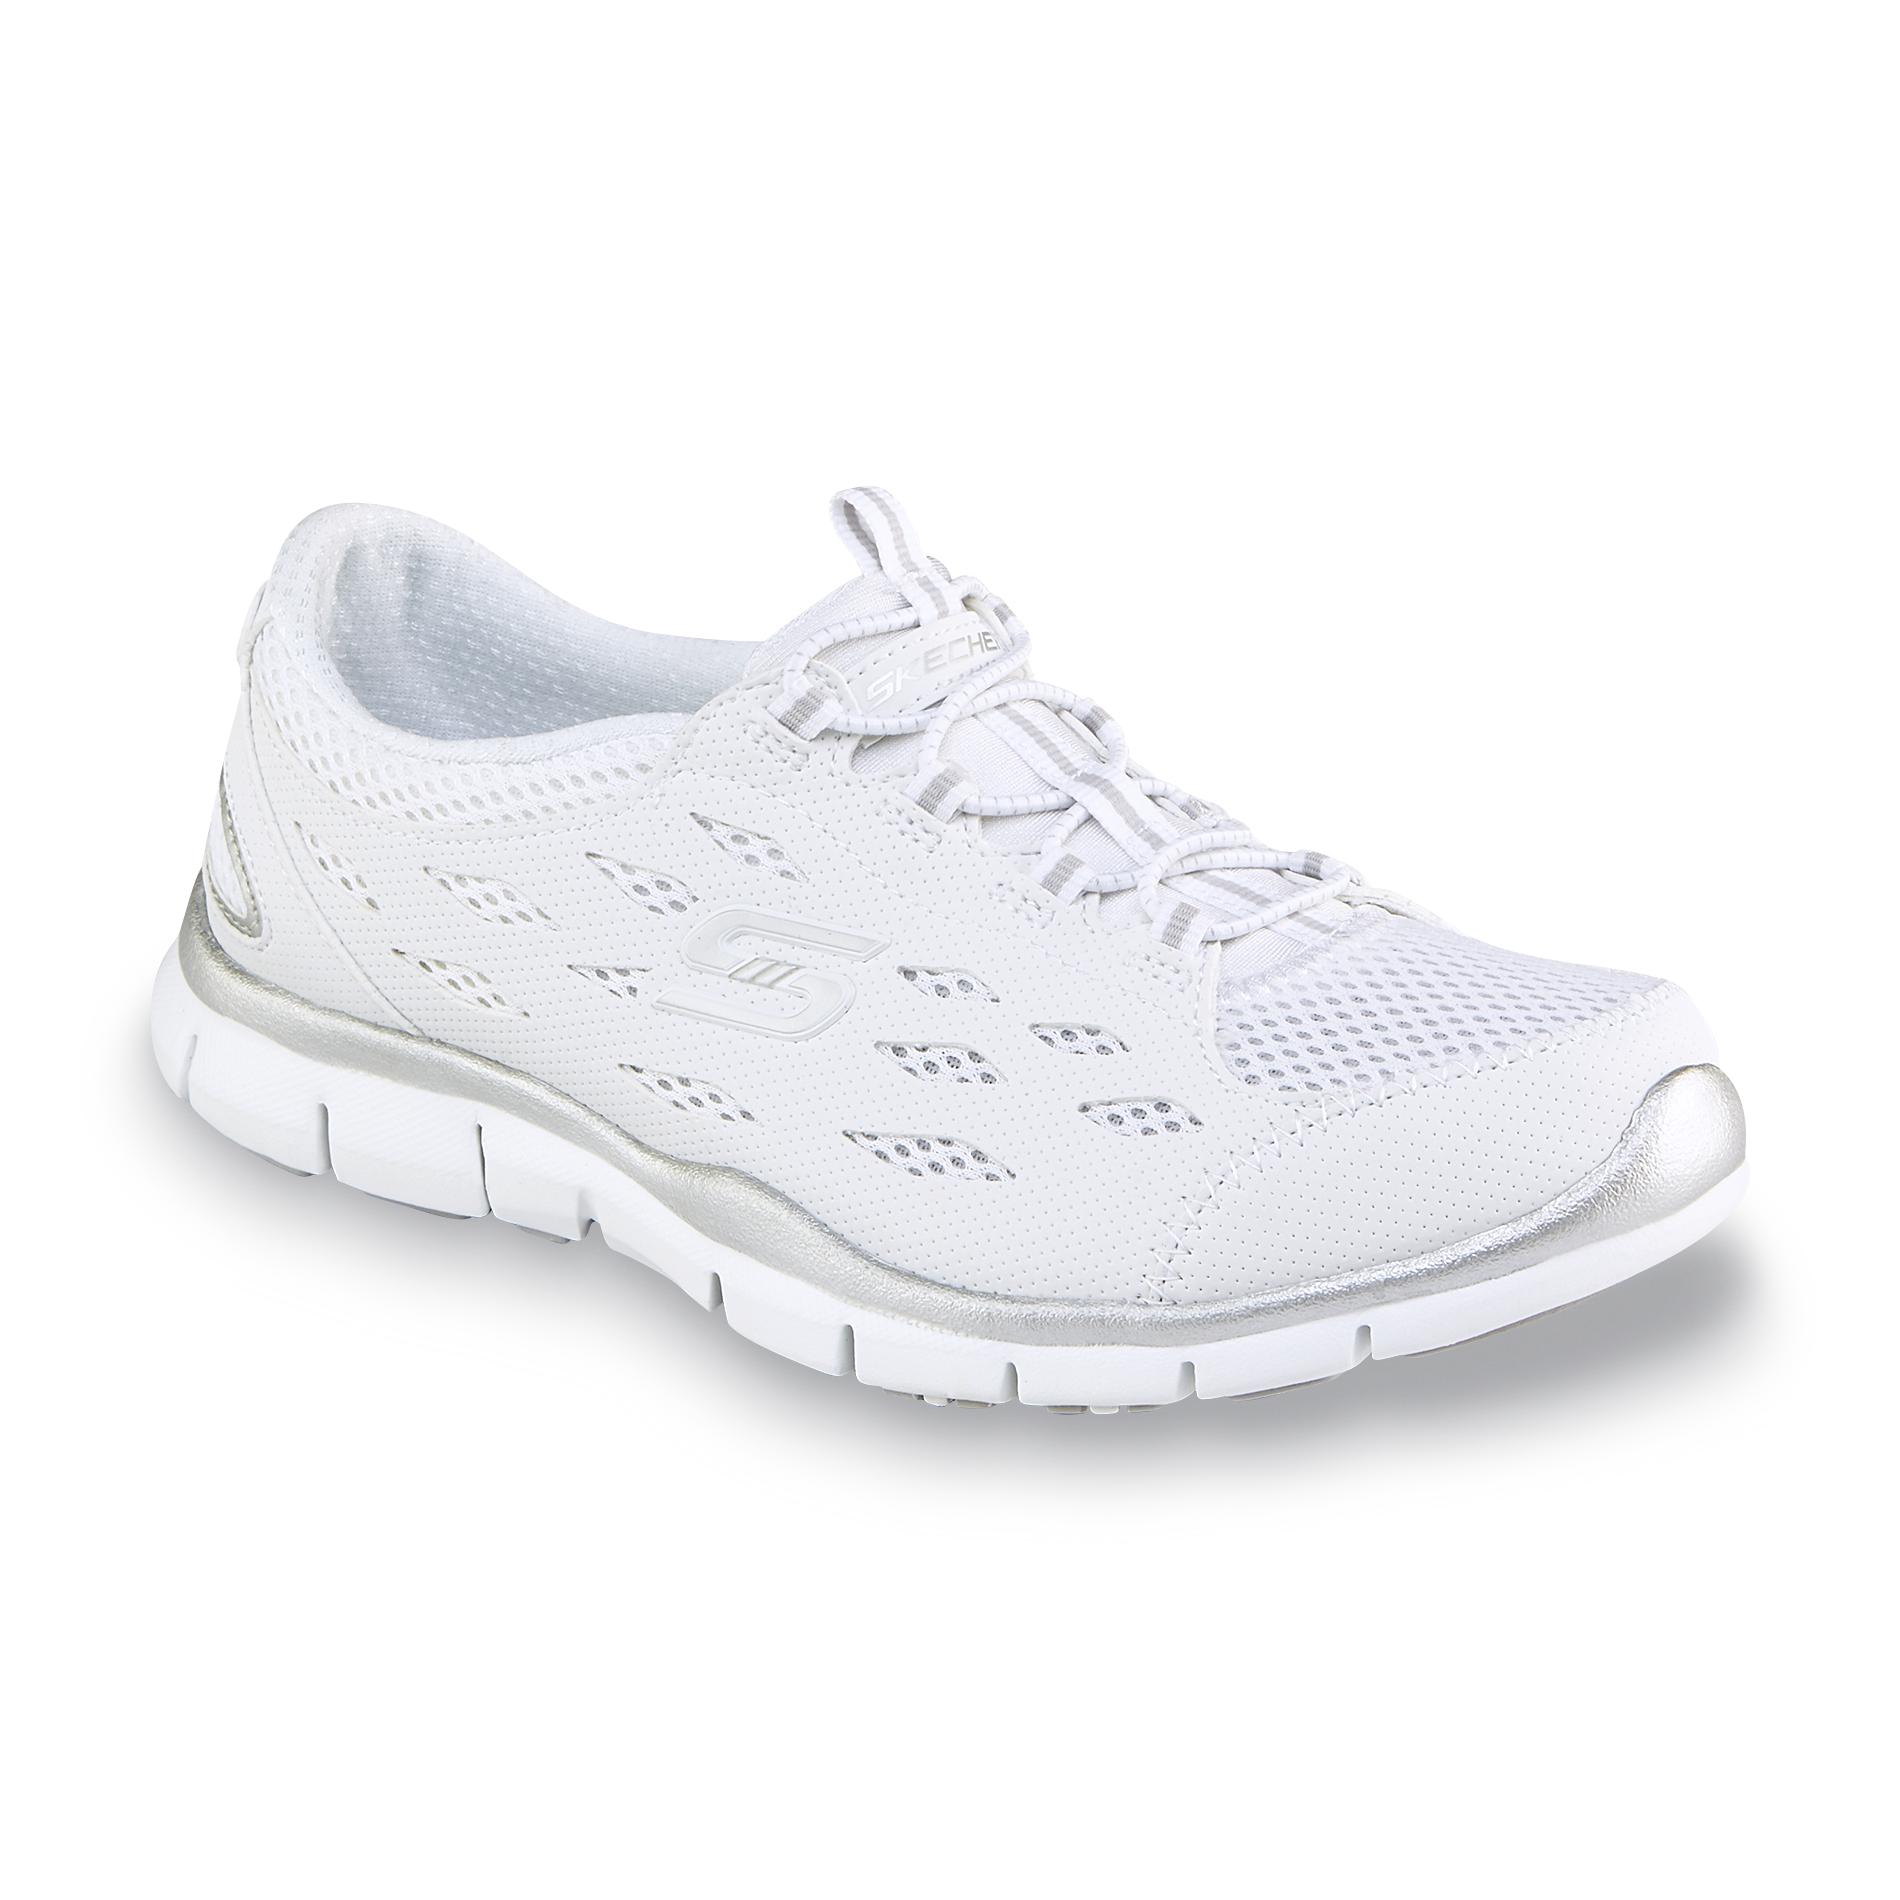 skechers going places white